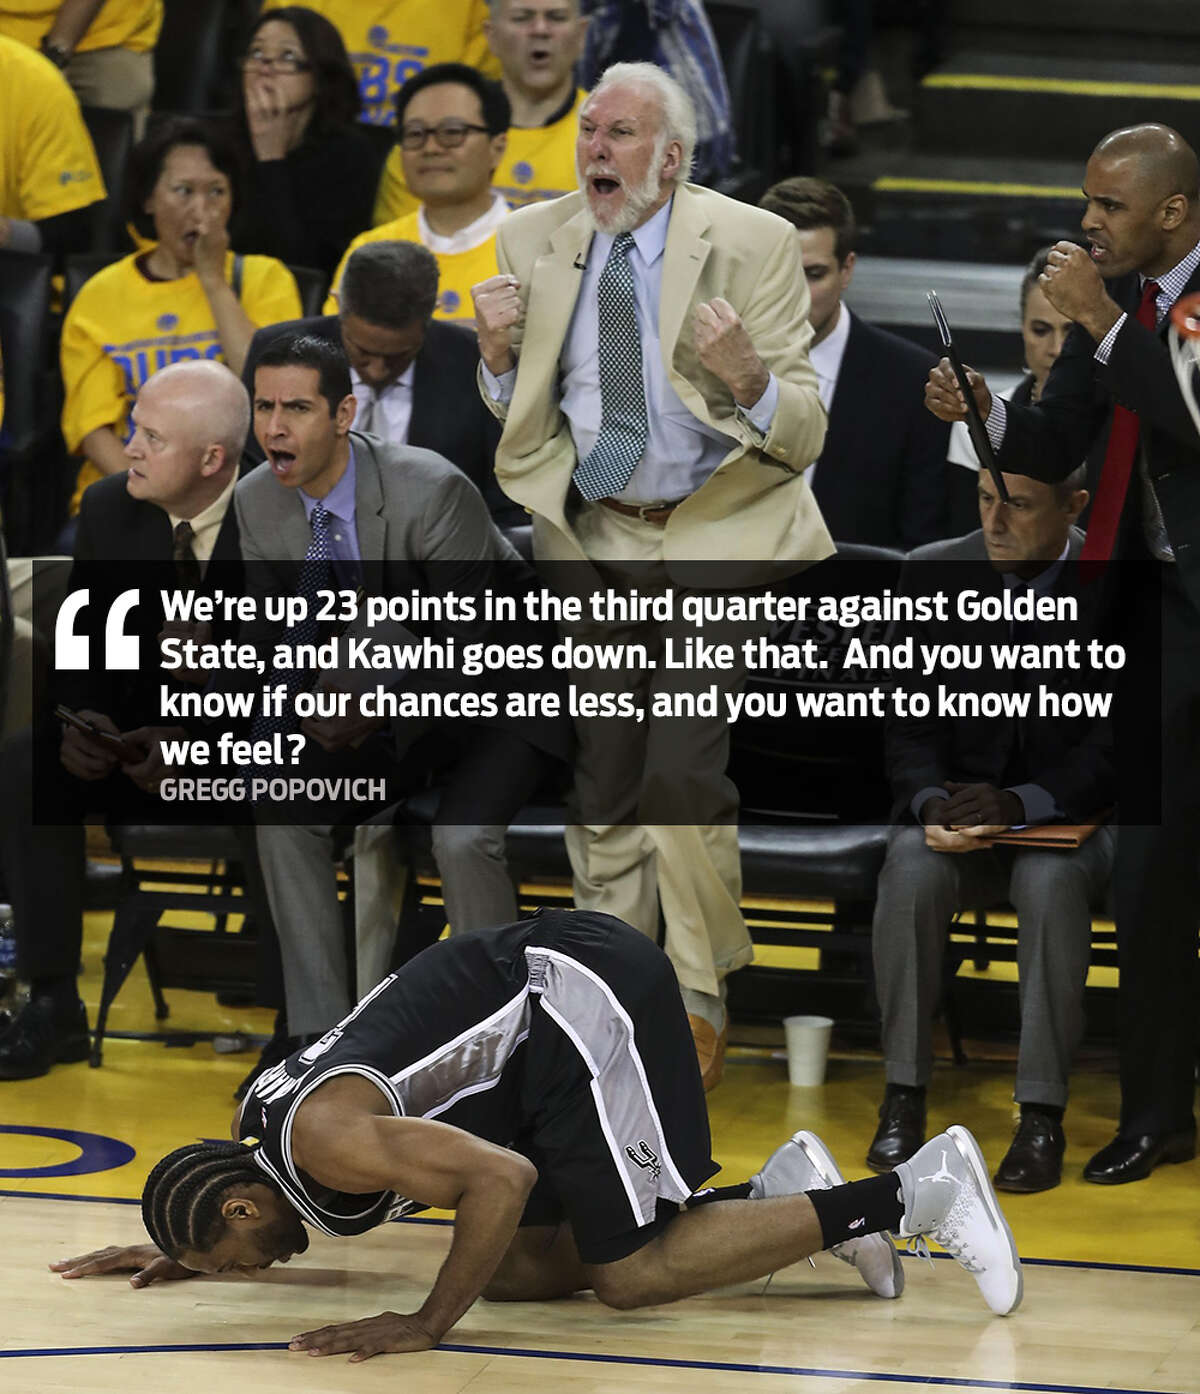 Spurs coach Gregg Popovich on Monday morning went scorched earth on Zaza Pachulia after Kawhi Leonard re-injured his sprained ankle in Game 1 of the Western Conference Finals against the Golden State Warriors.